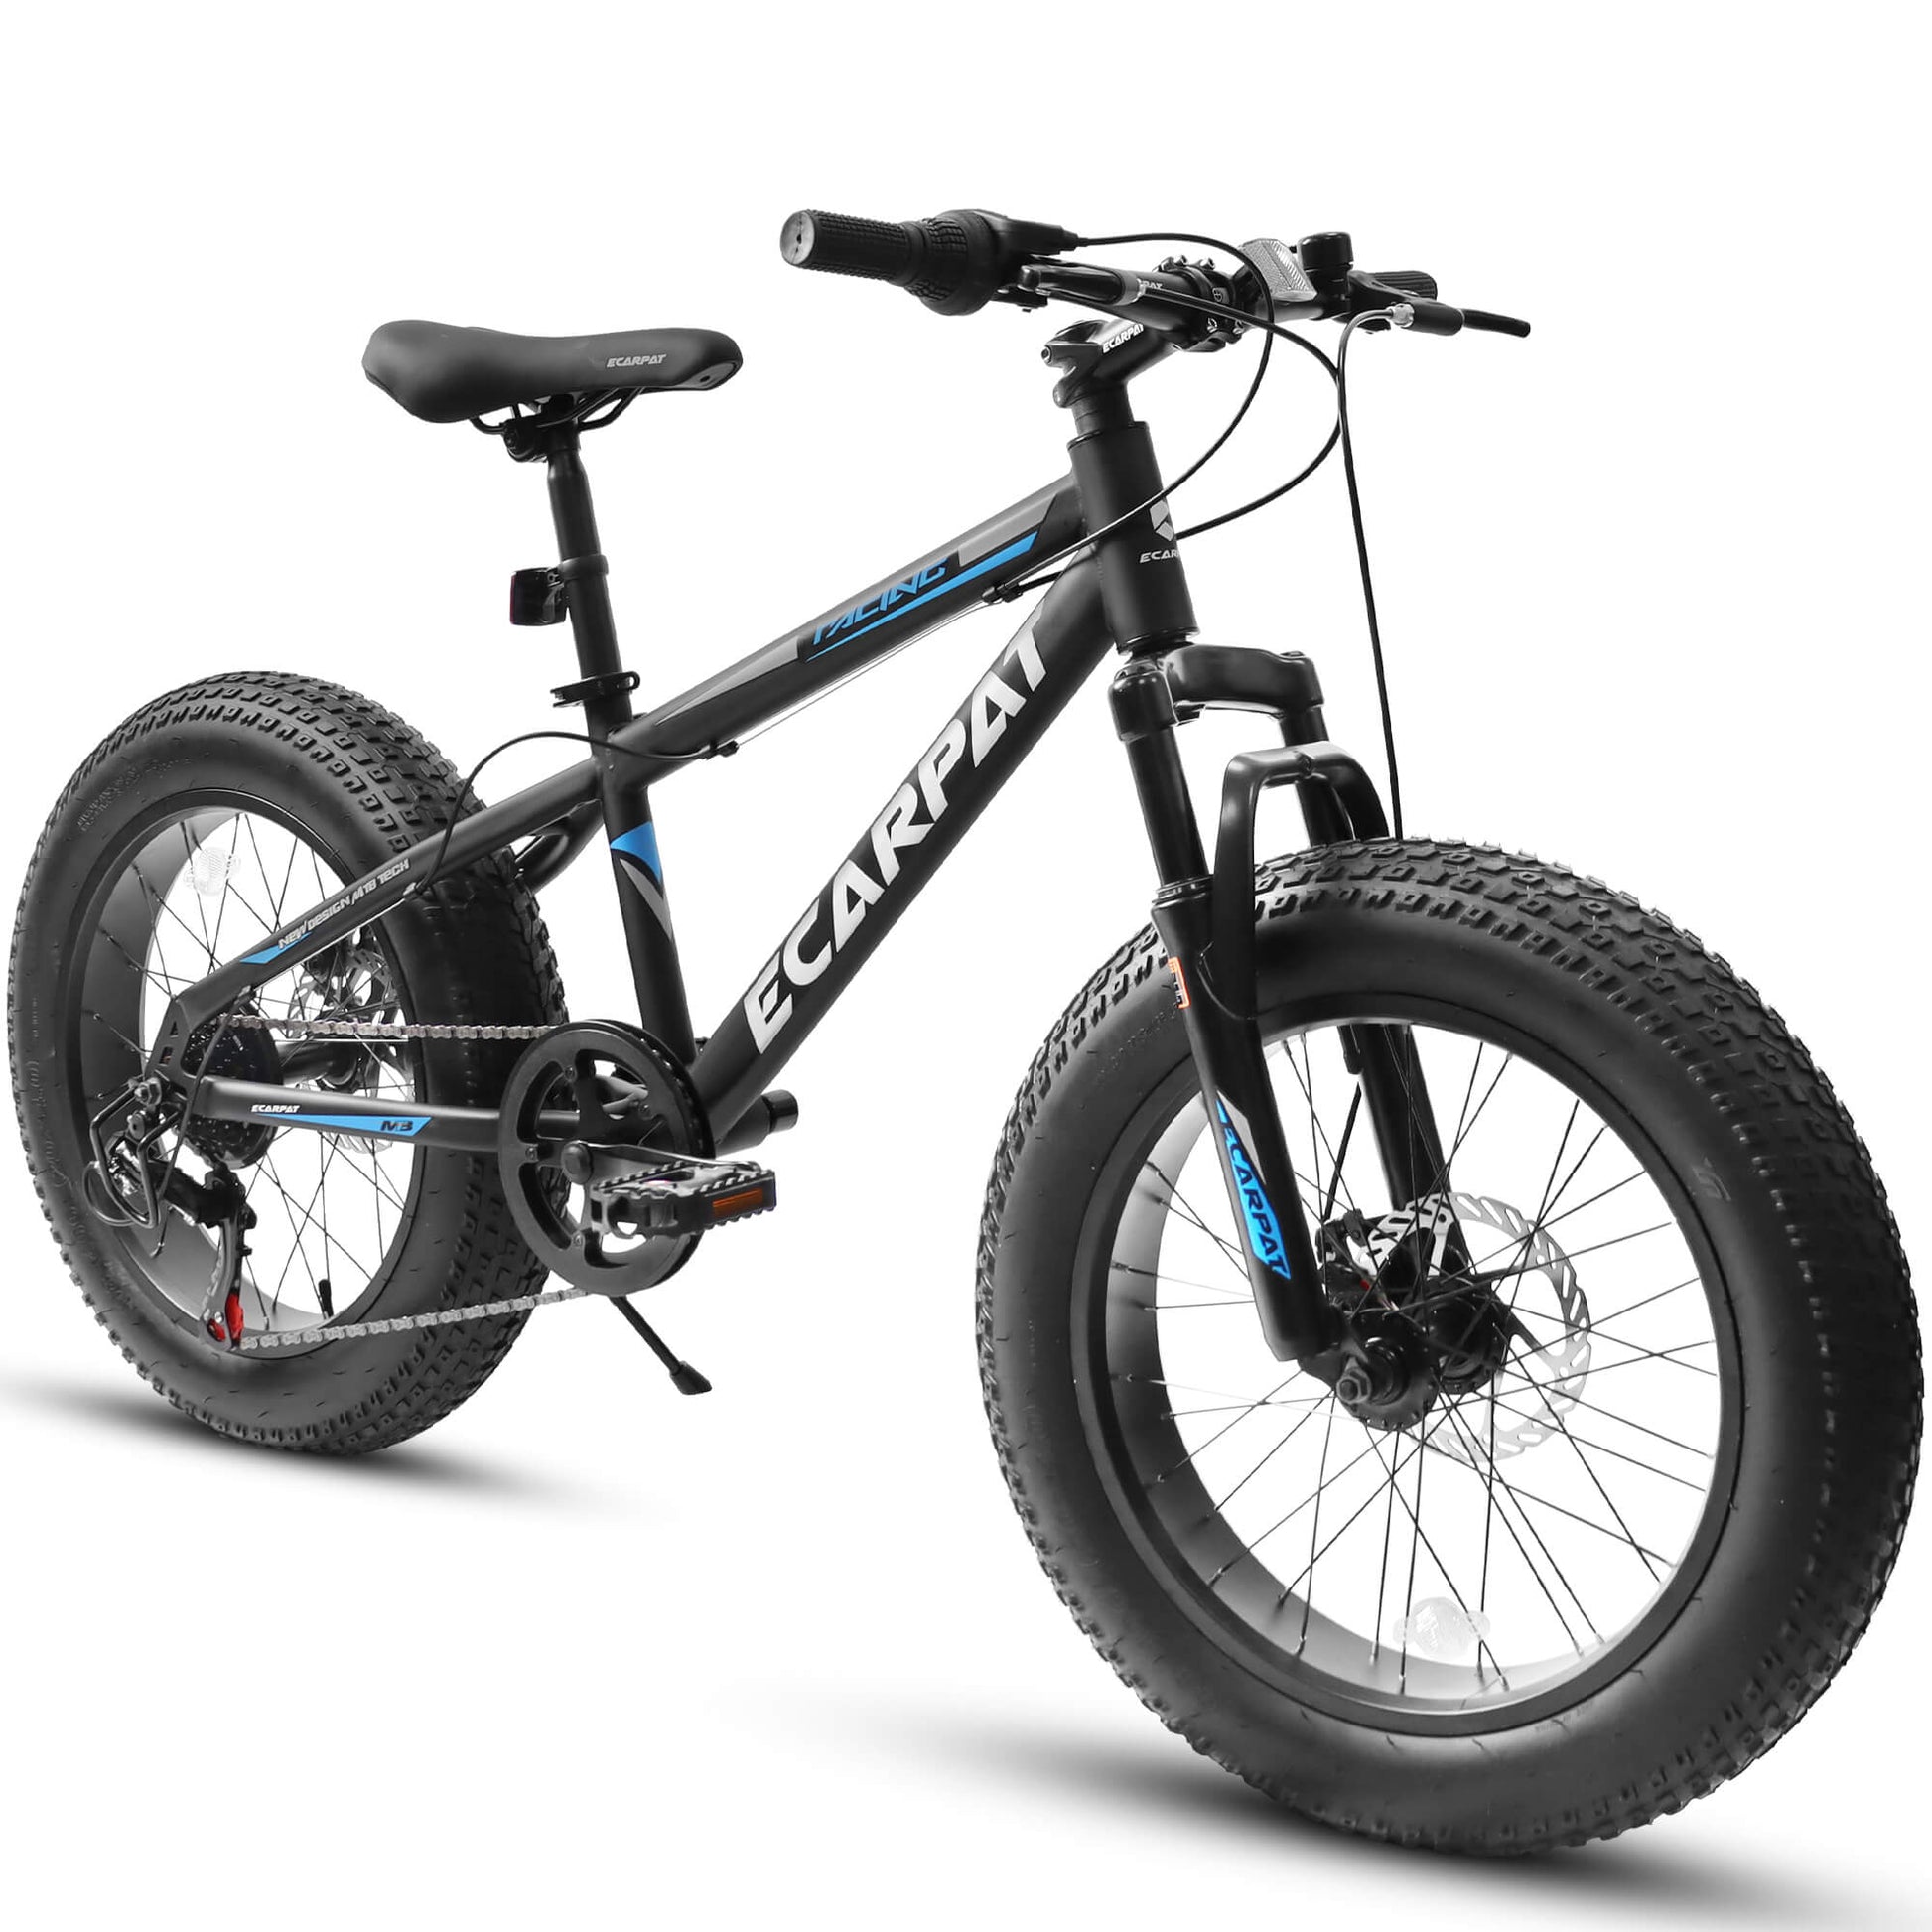 85% Pre-Assembled Ecarpat 20"×4.0" carbon steel fat tire bike crafted with a rugged carbon steel frame